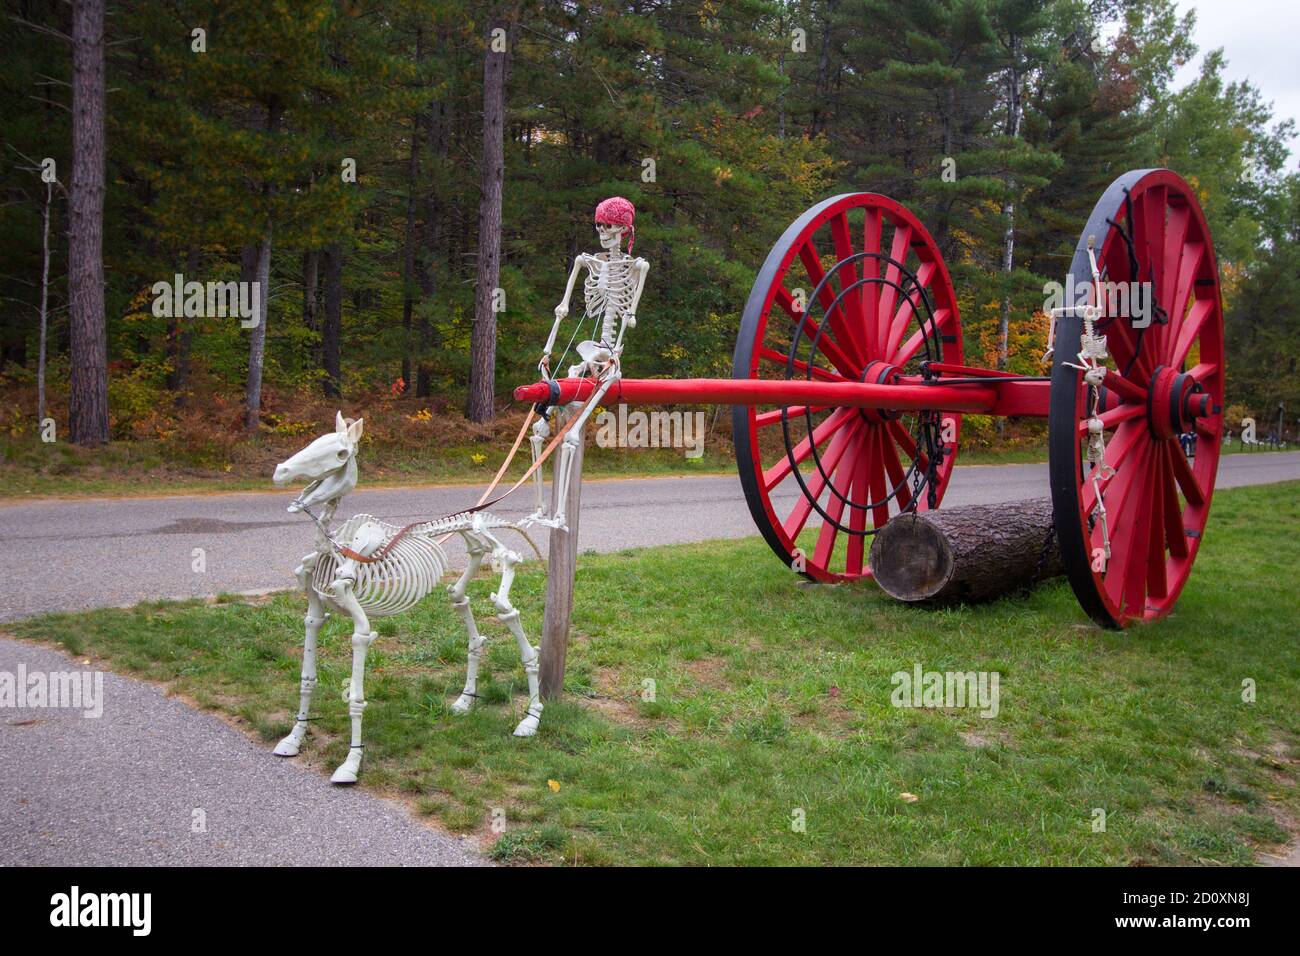 Halloween decorations celebrate the harvest festival at Hartwick Pines State Park in Michigan. Stock Photo